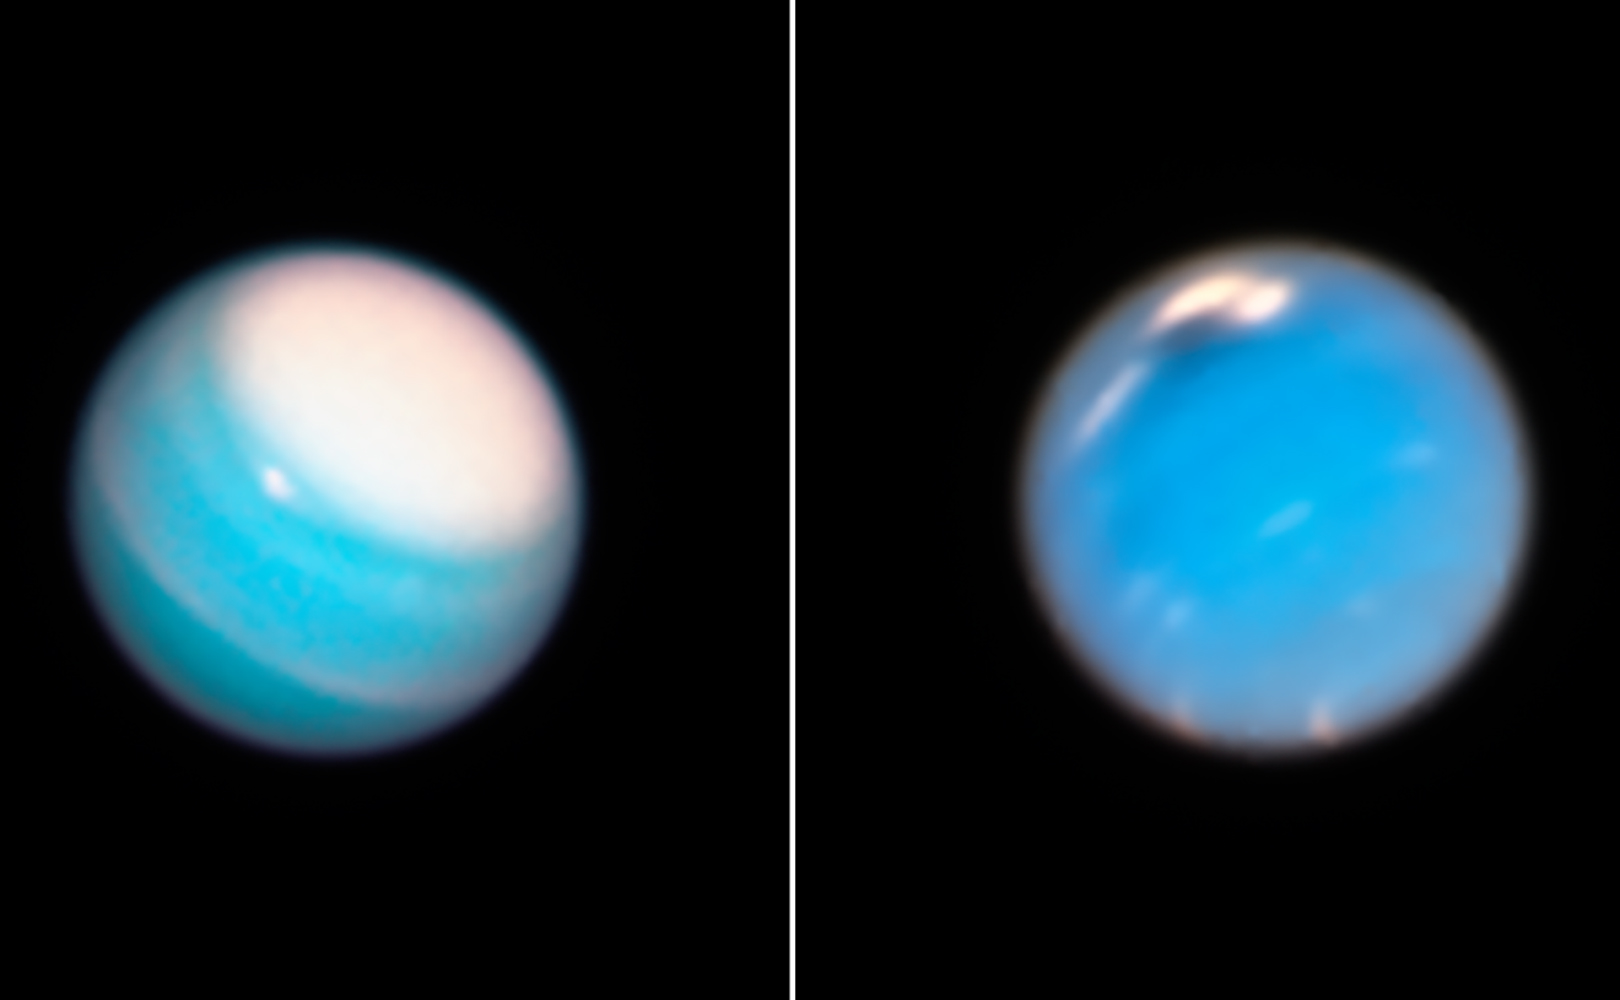 Uranus and Neptune may be different than we thought